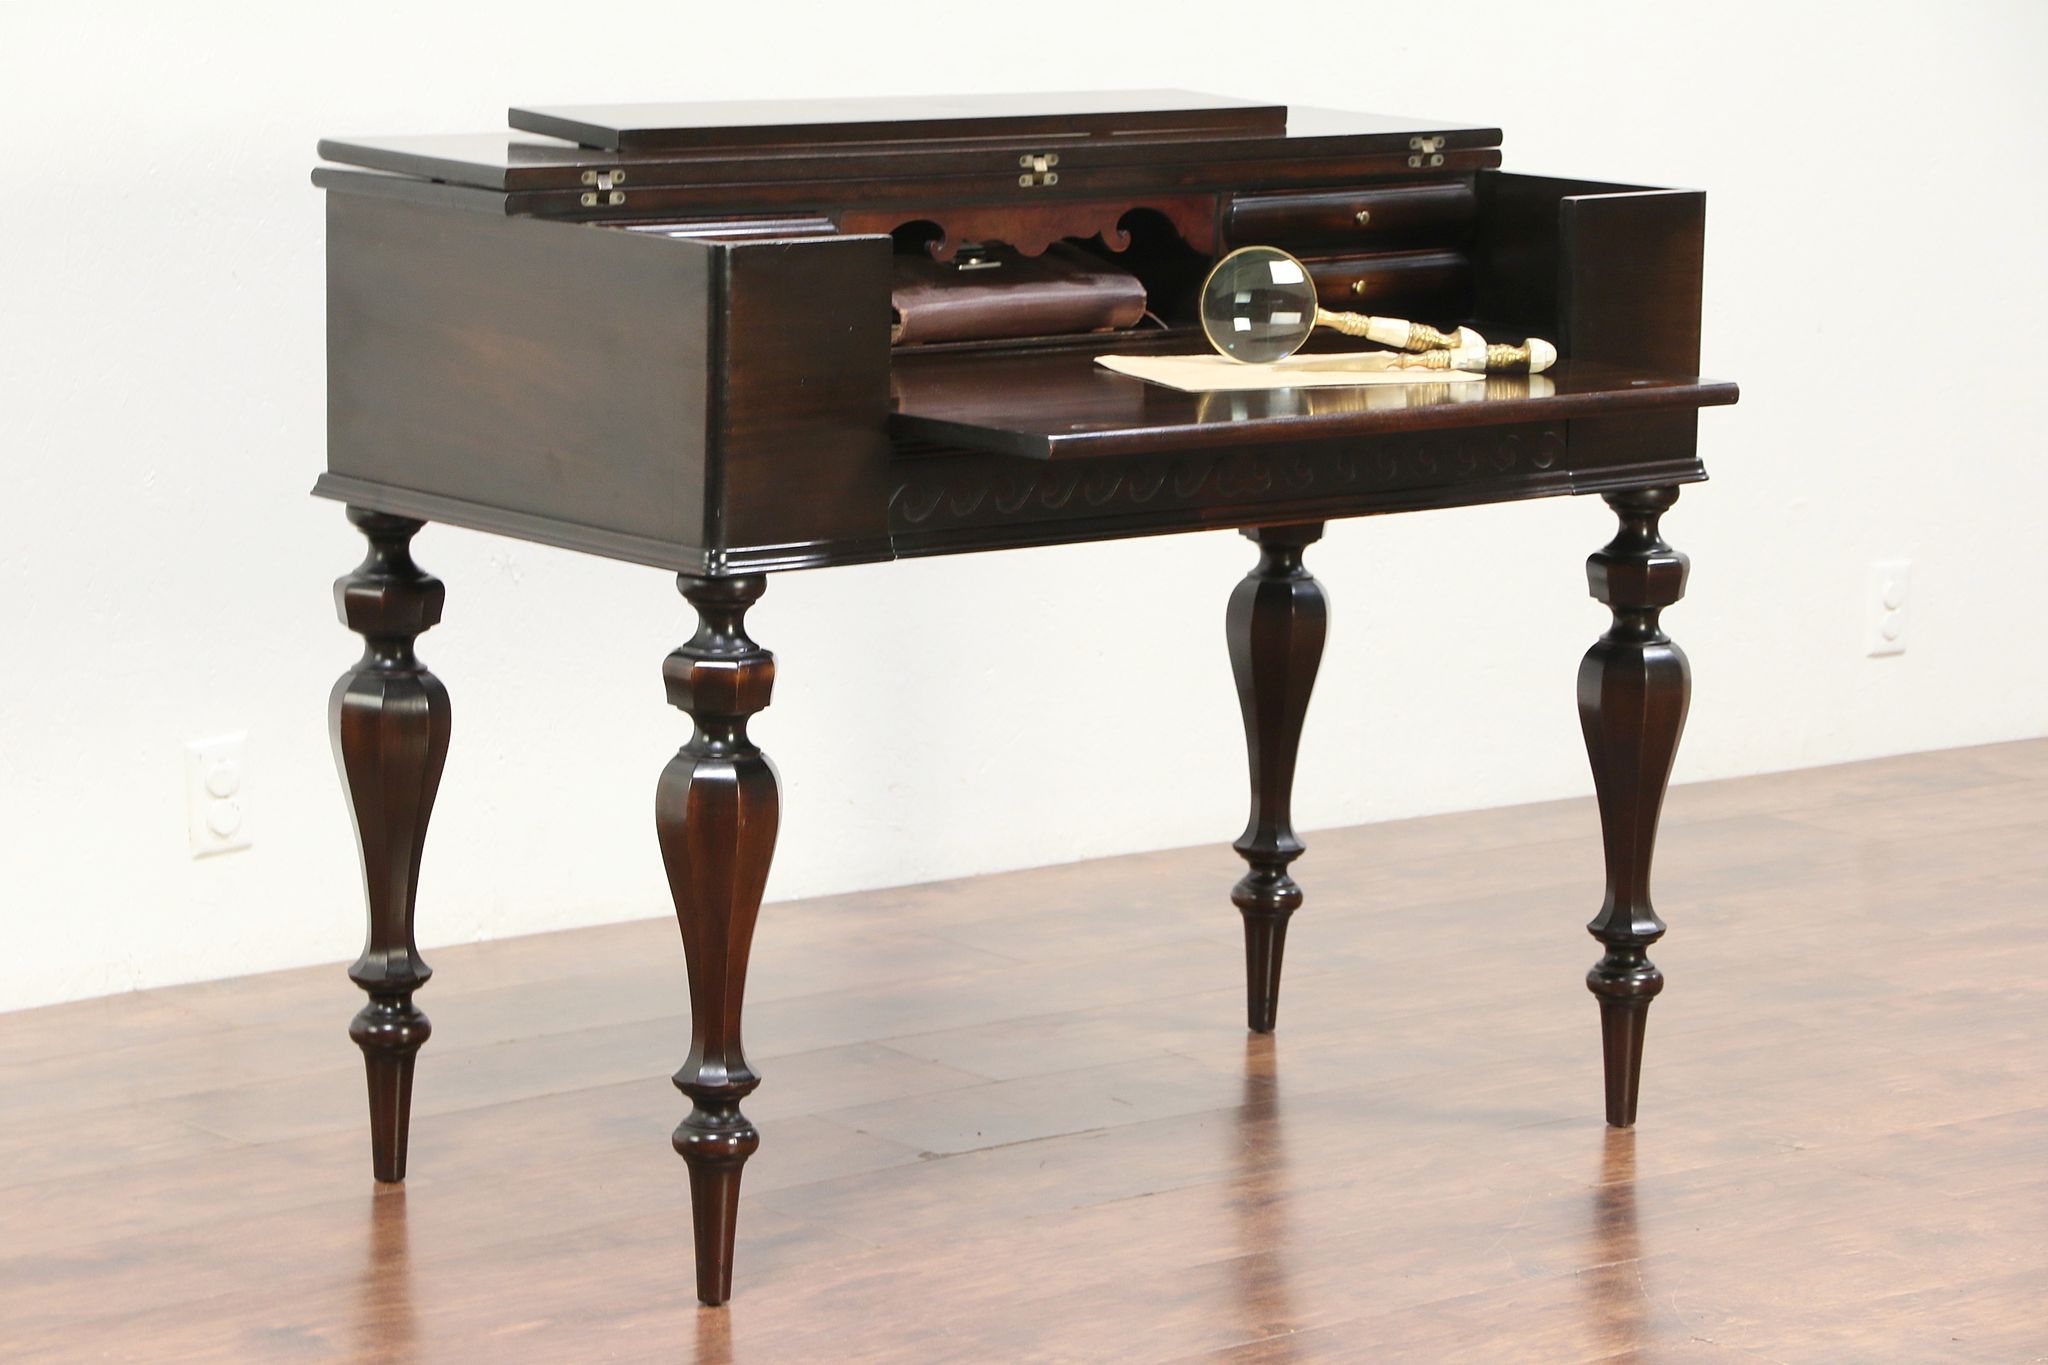 Sold Spinet Desk Or Hall Console Table 1925 Mahogany Antique